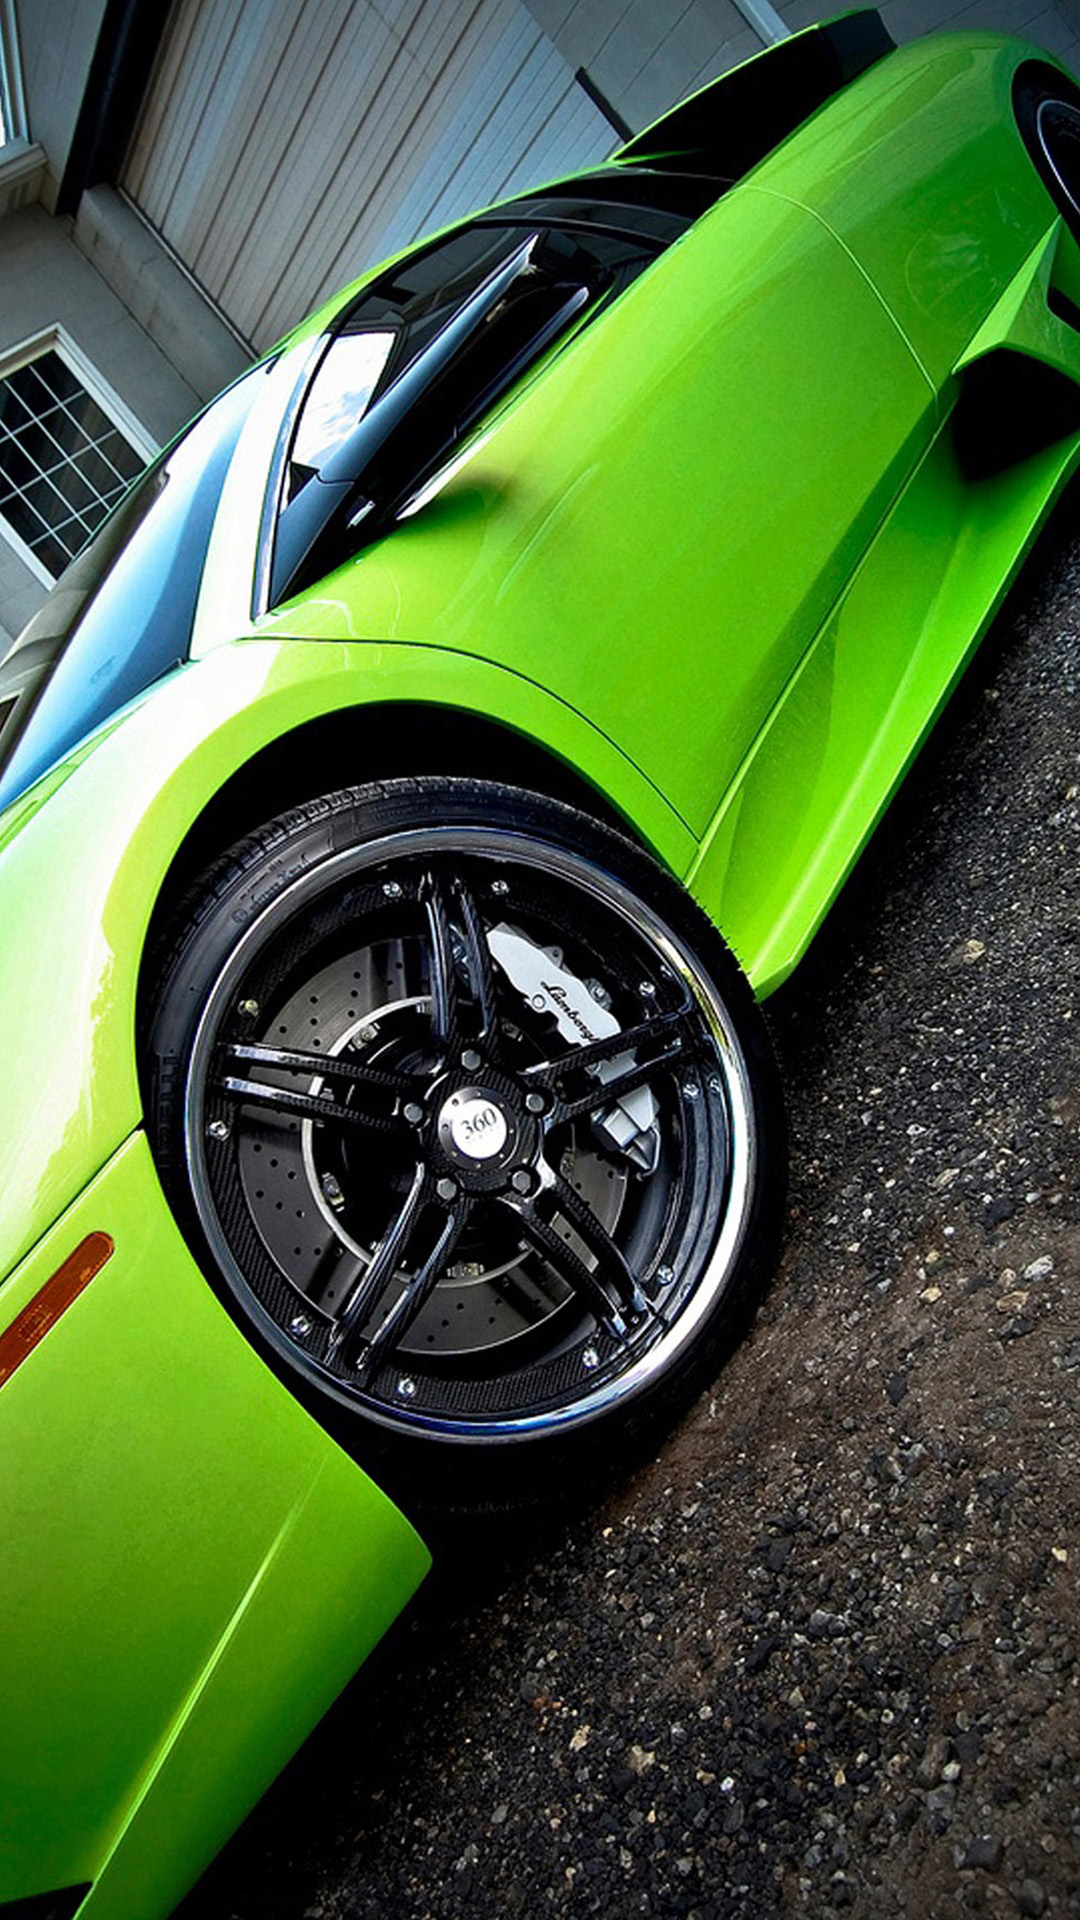 hd car wallpapers for android,land vehicle,vehicle,car,alloy wheel,green